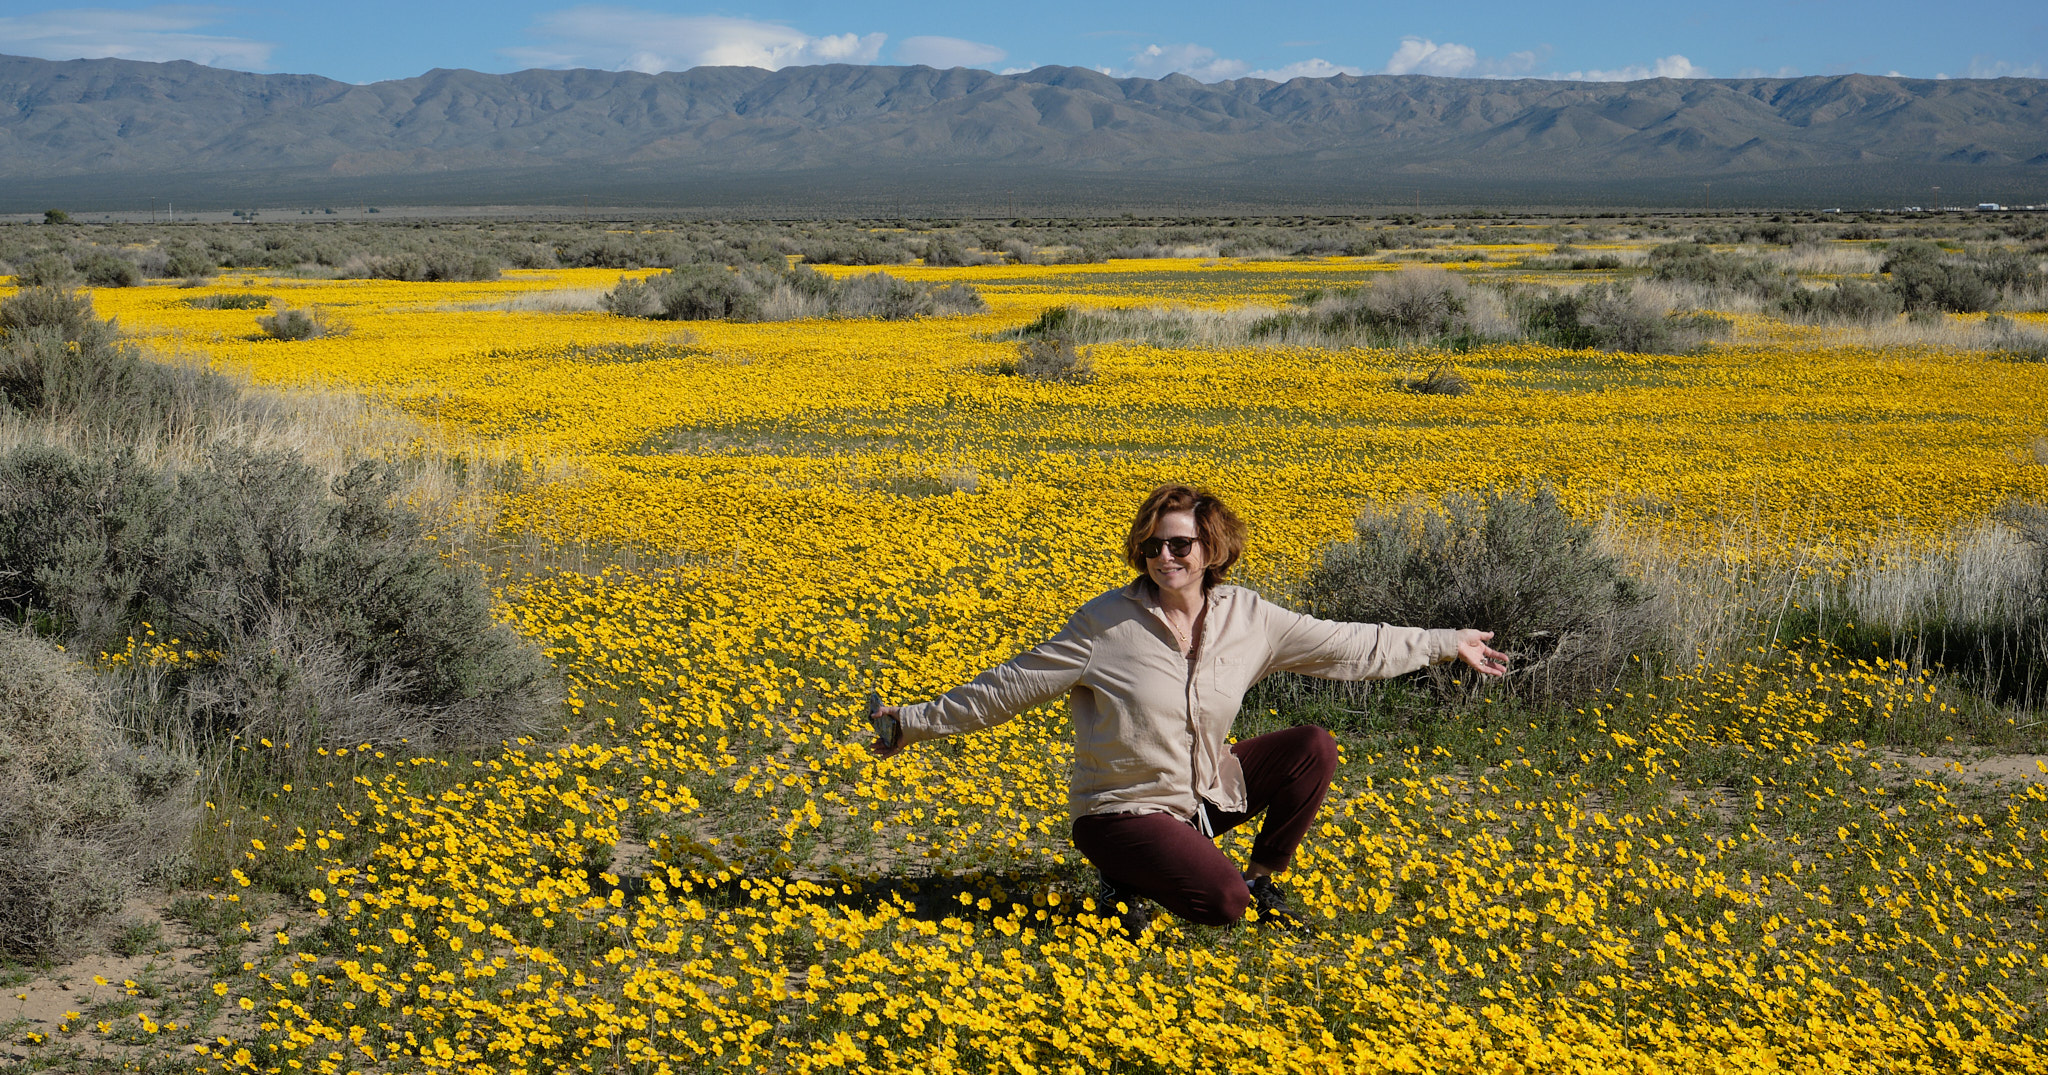 Audrey in a field of Desert Gold in the Mojave Desert